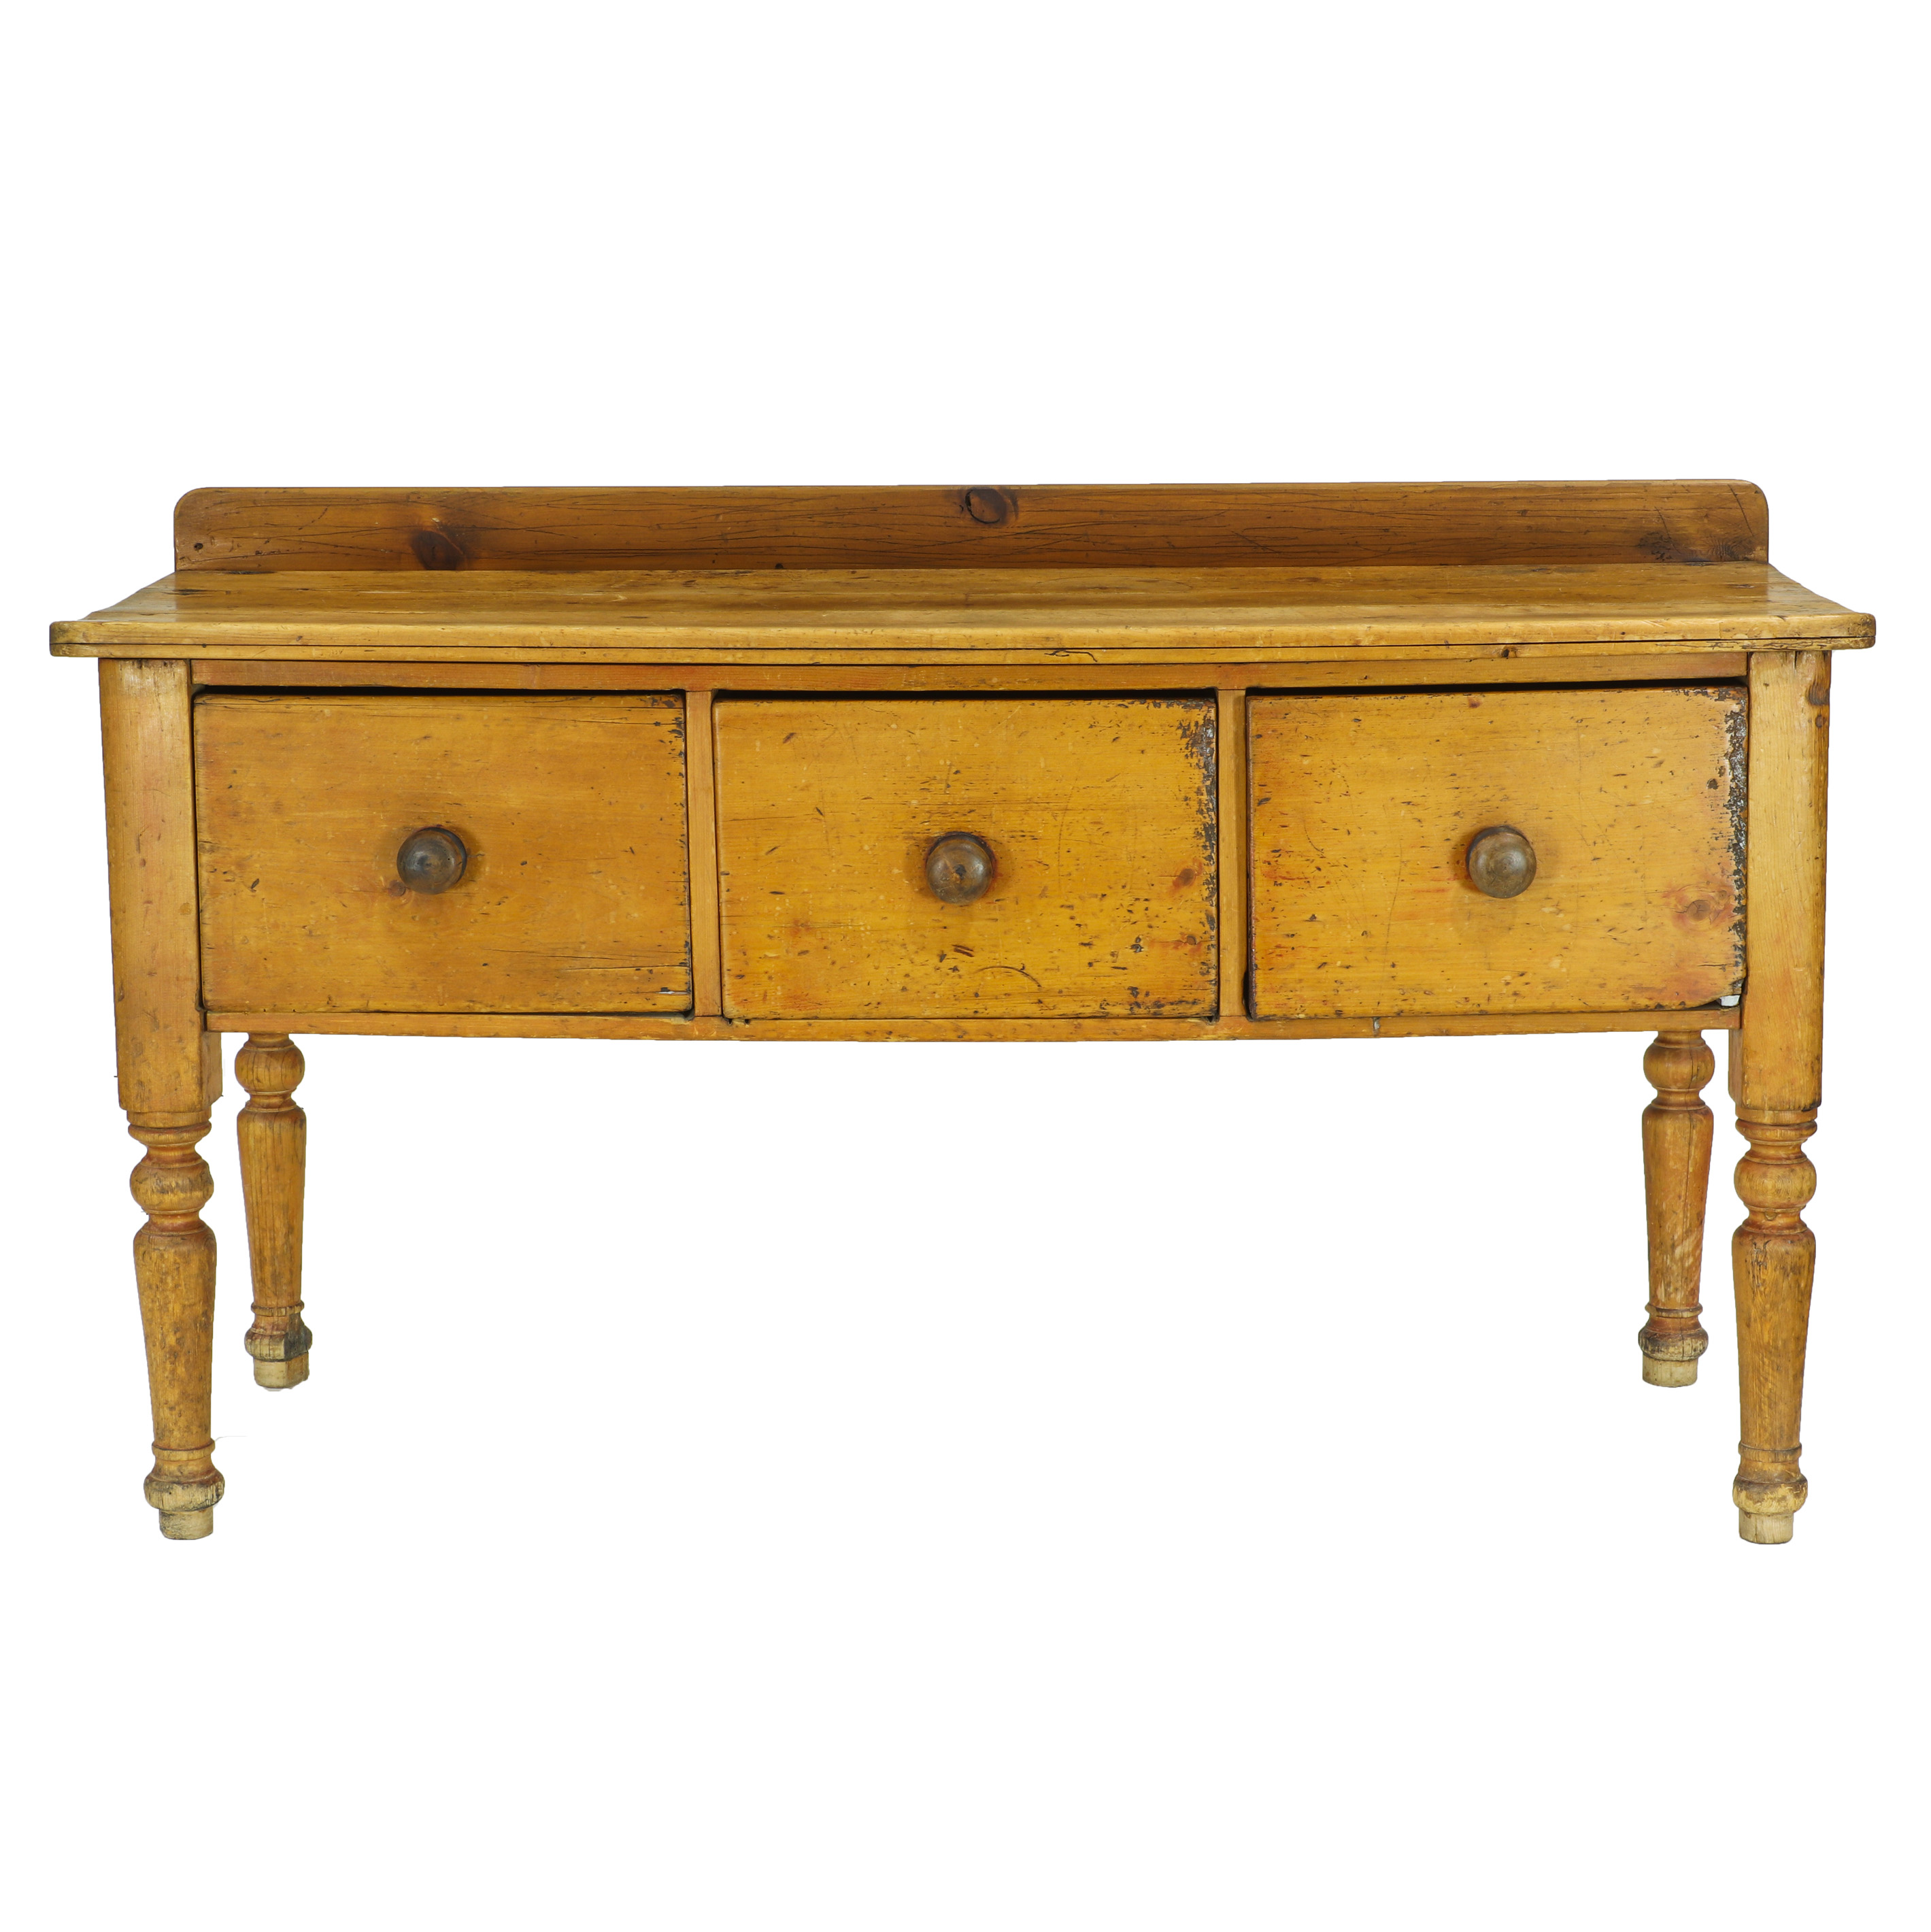 FRENCH PROVINCIAL FRUITWOOD WORK 3a3d6a